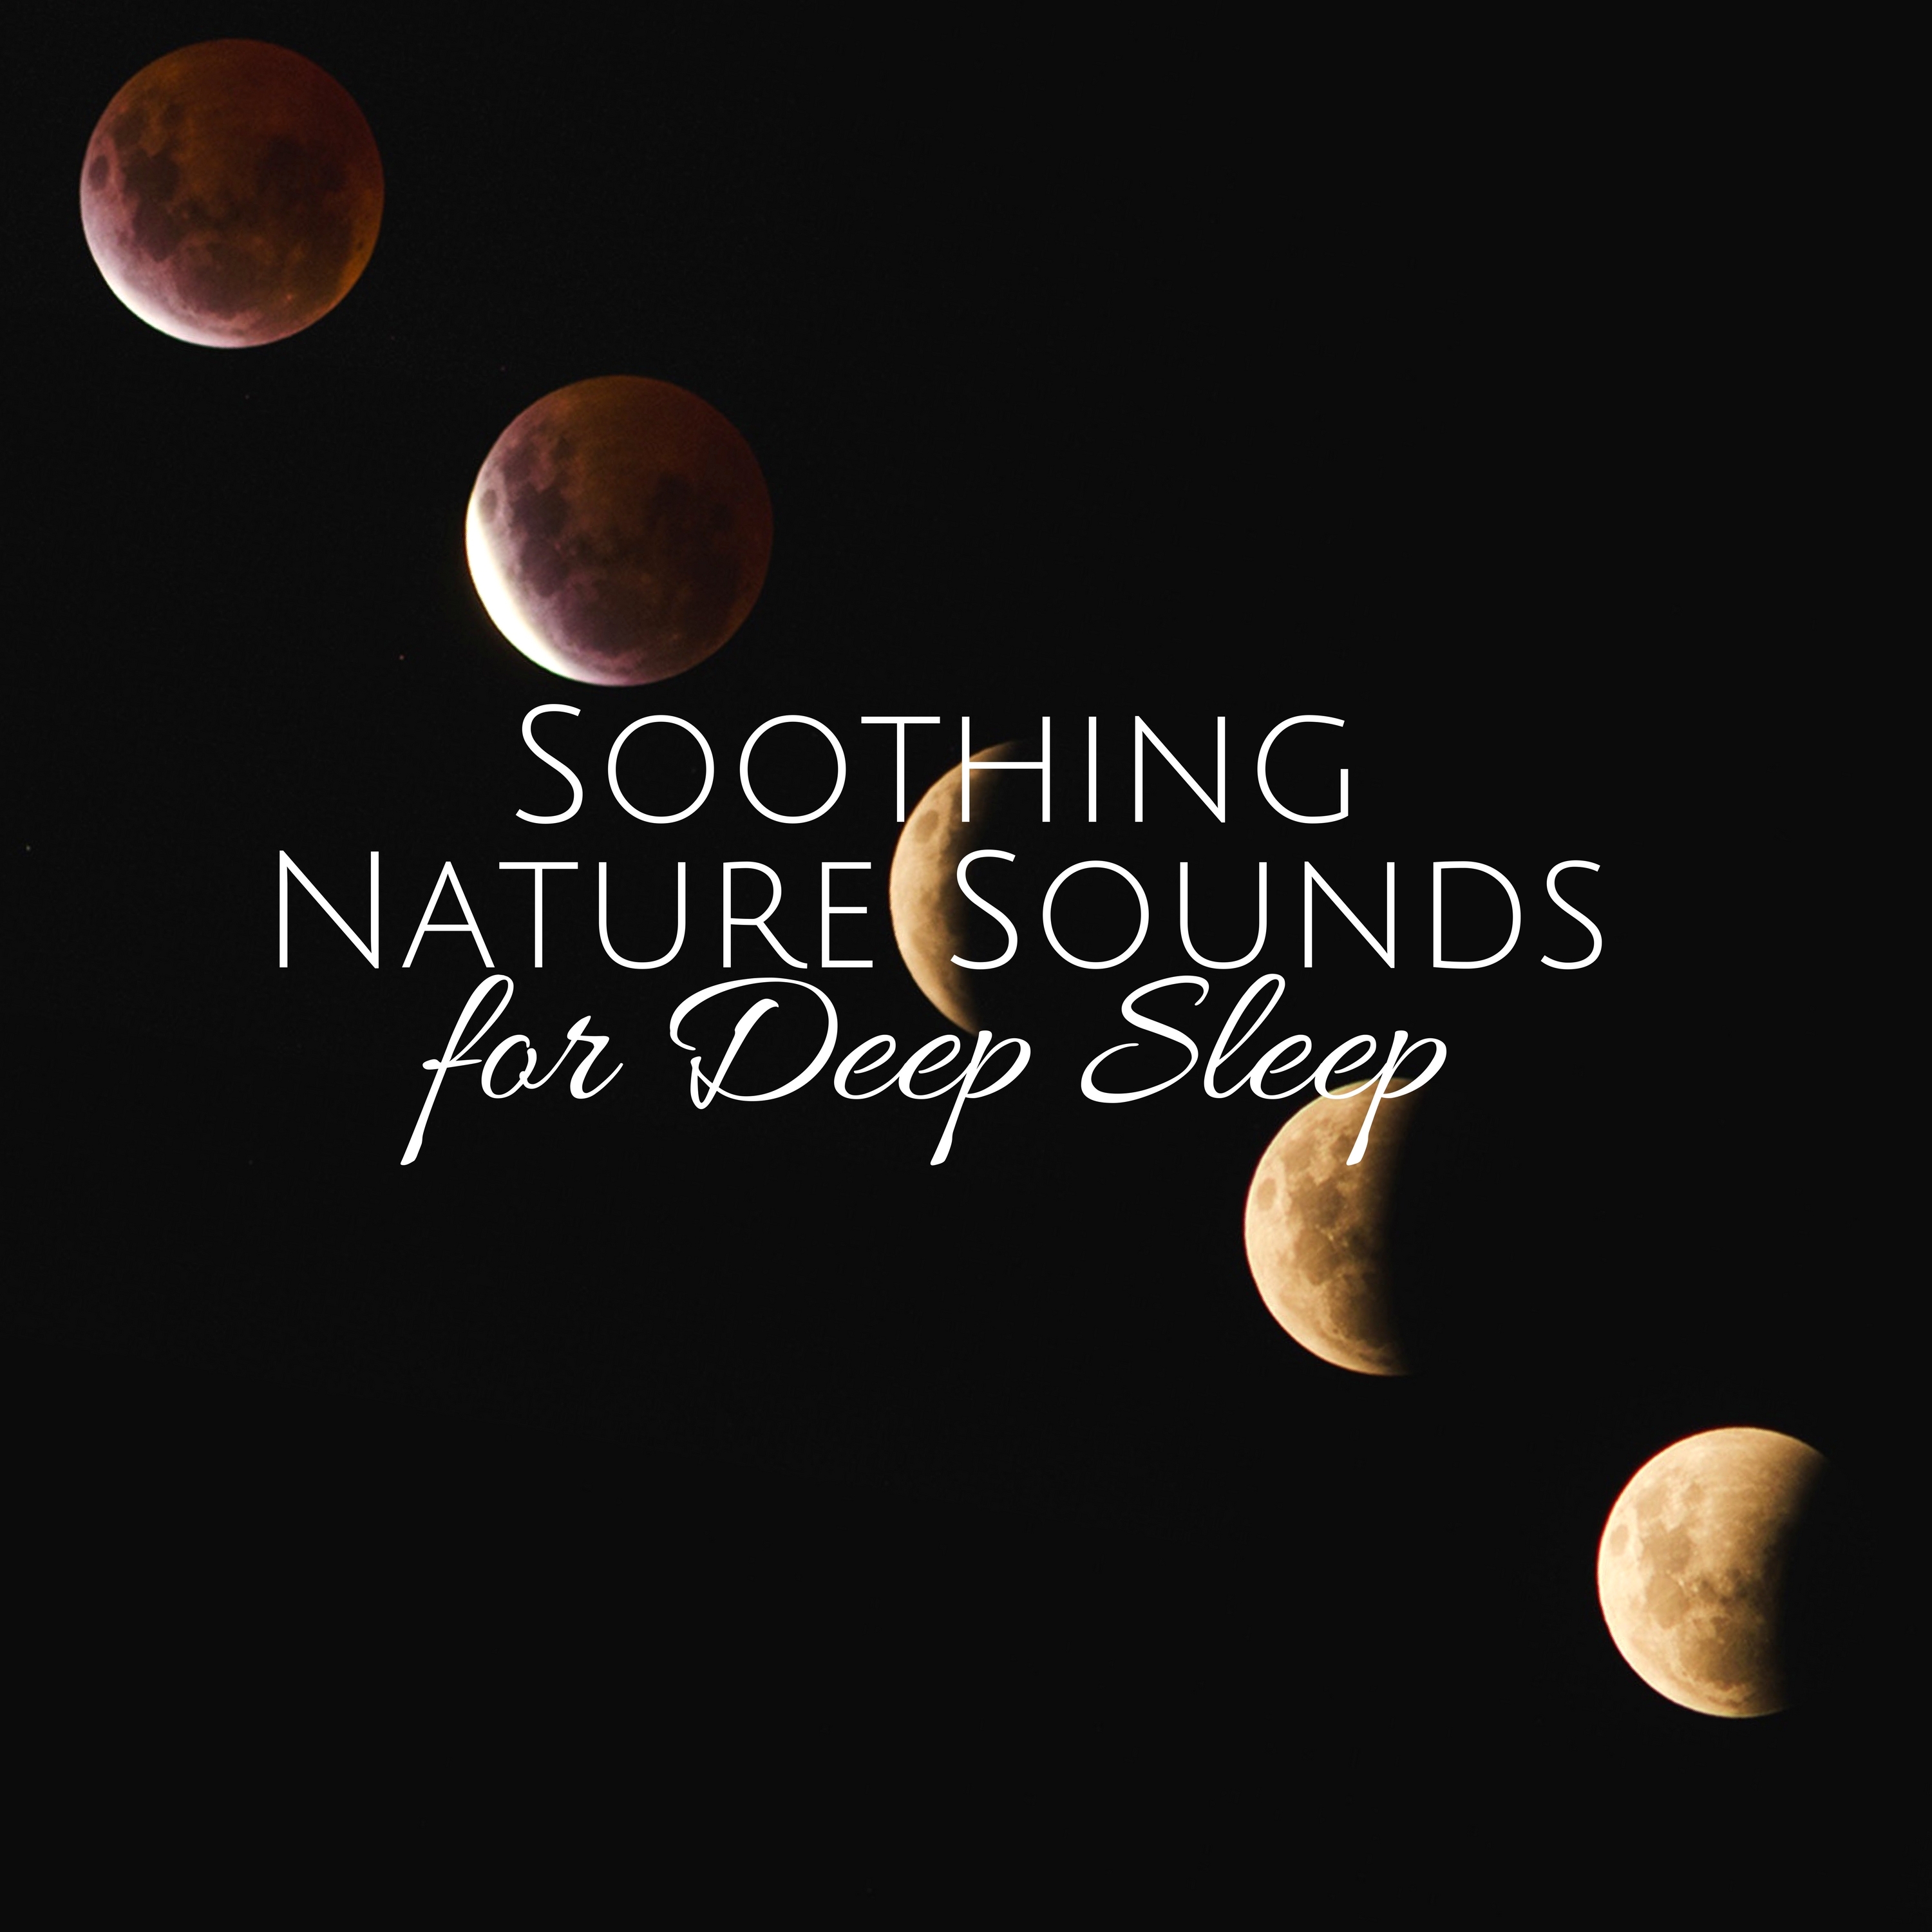 Soothing Nature Sounds for Deep Sleep - Relaxation and Meditation